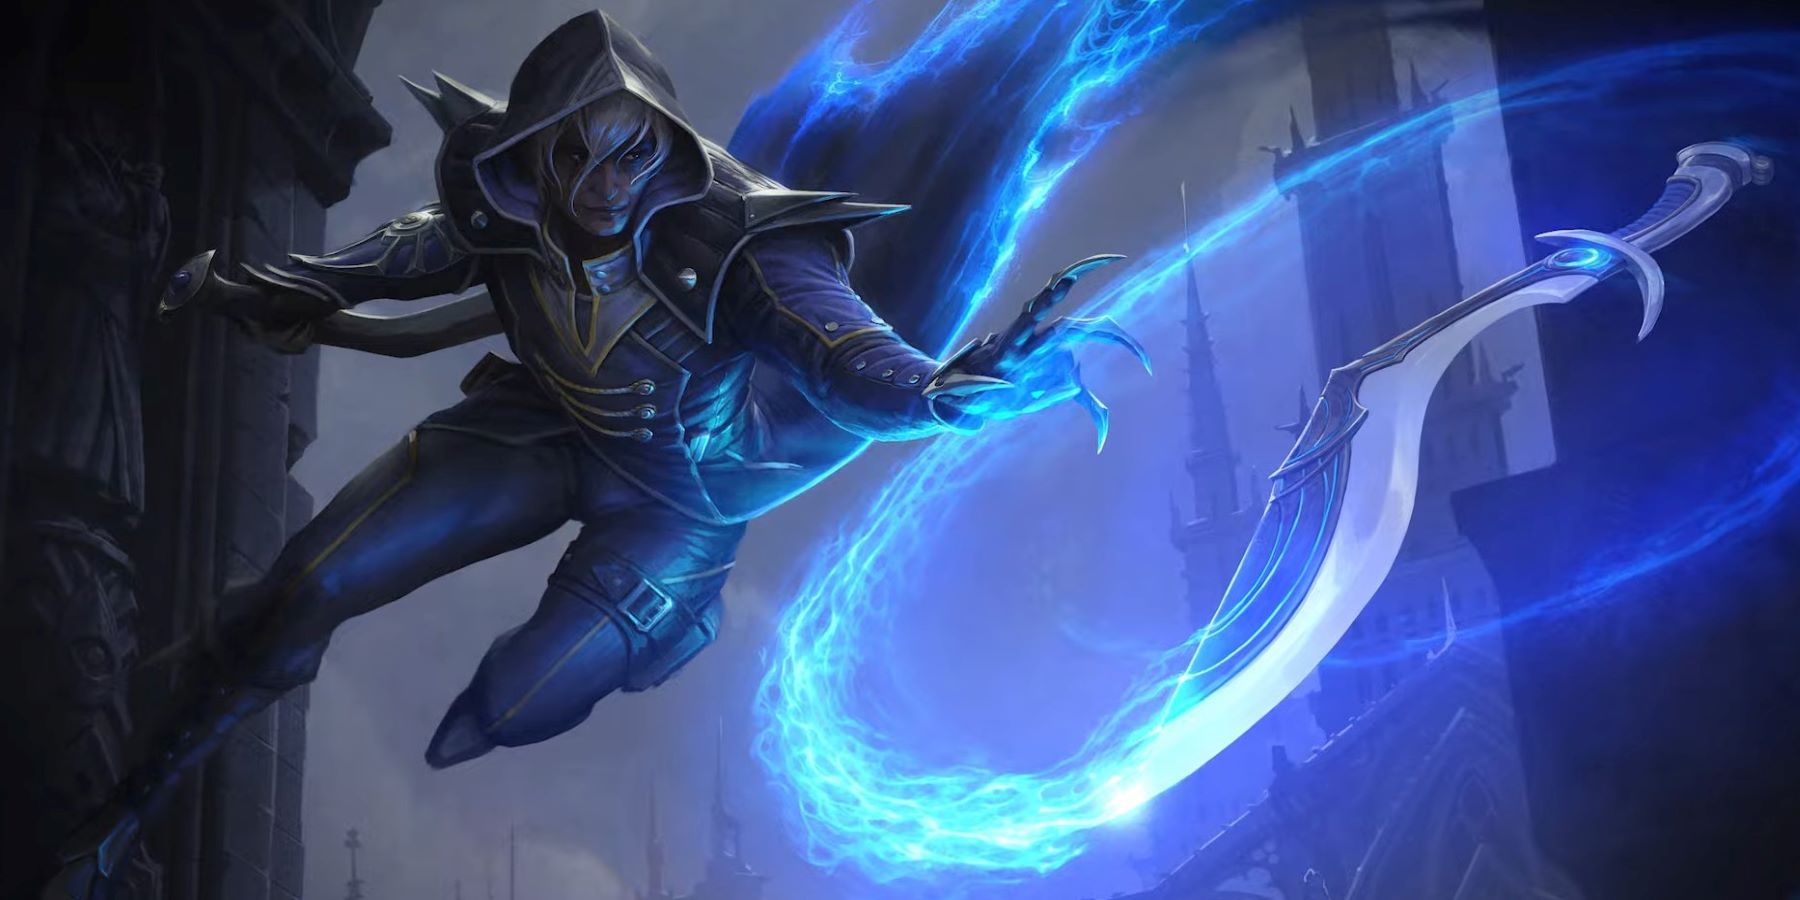 Art for the Dimir Assassin class from Magic: Legends leaping off a wall and tossing a magical knife